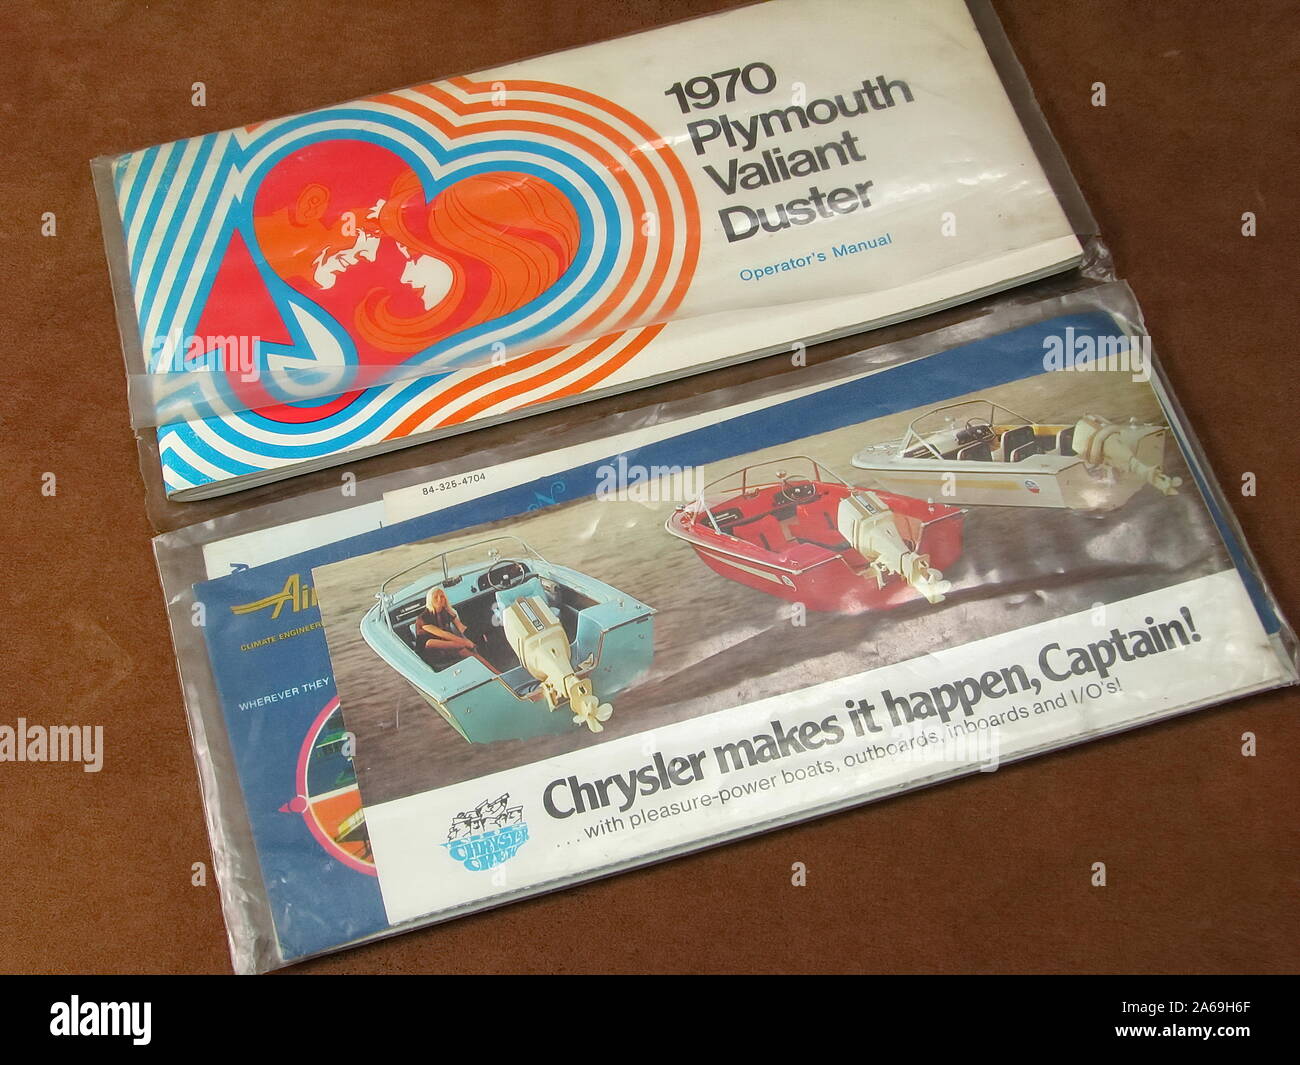 Vintage 1970 Plymouth Valiant Duster operator`s manual with Chrysler boating motors brochures. Stock Photo